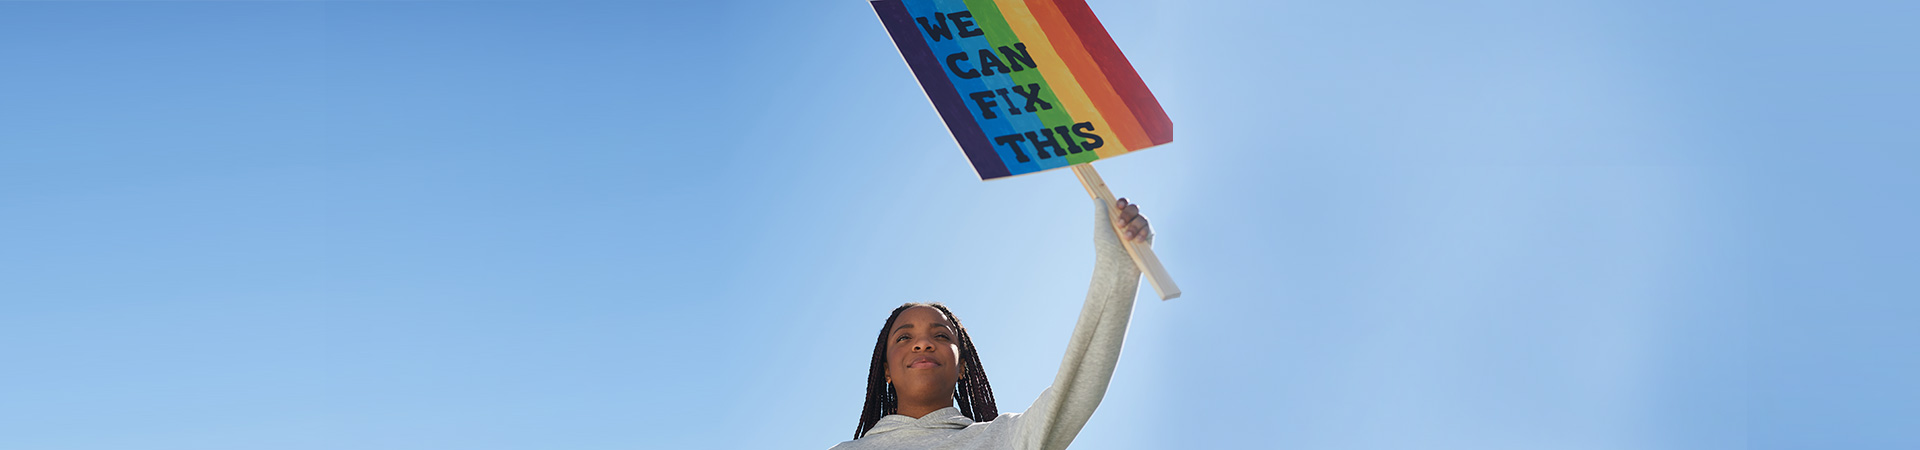  High school senior ambassador Girl Scout holding sign that reads "We can fix this" with rainbow stripes. 